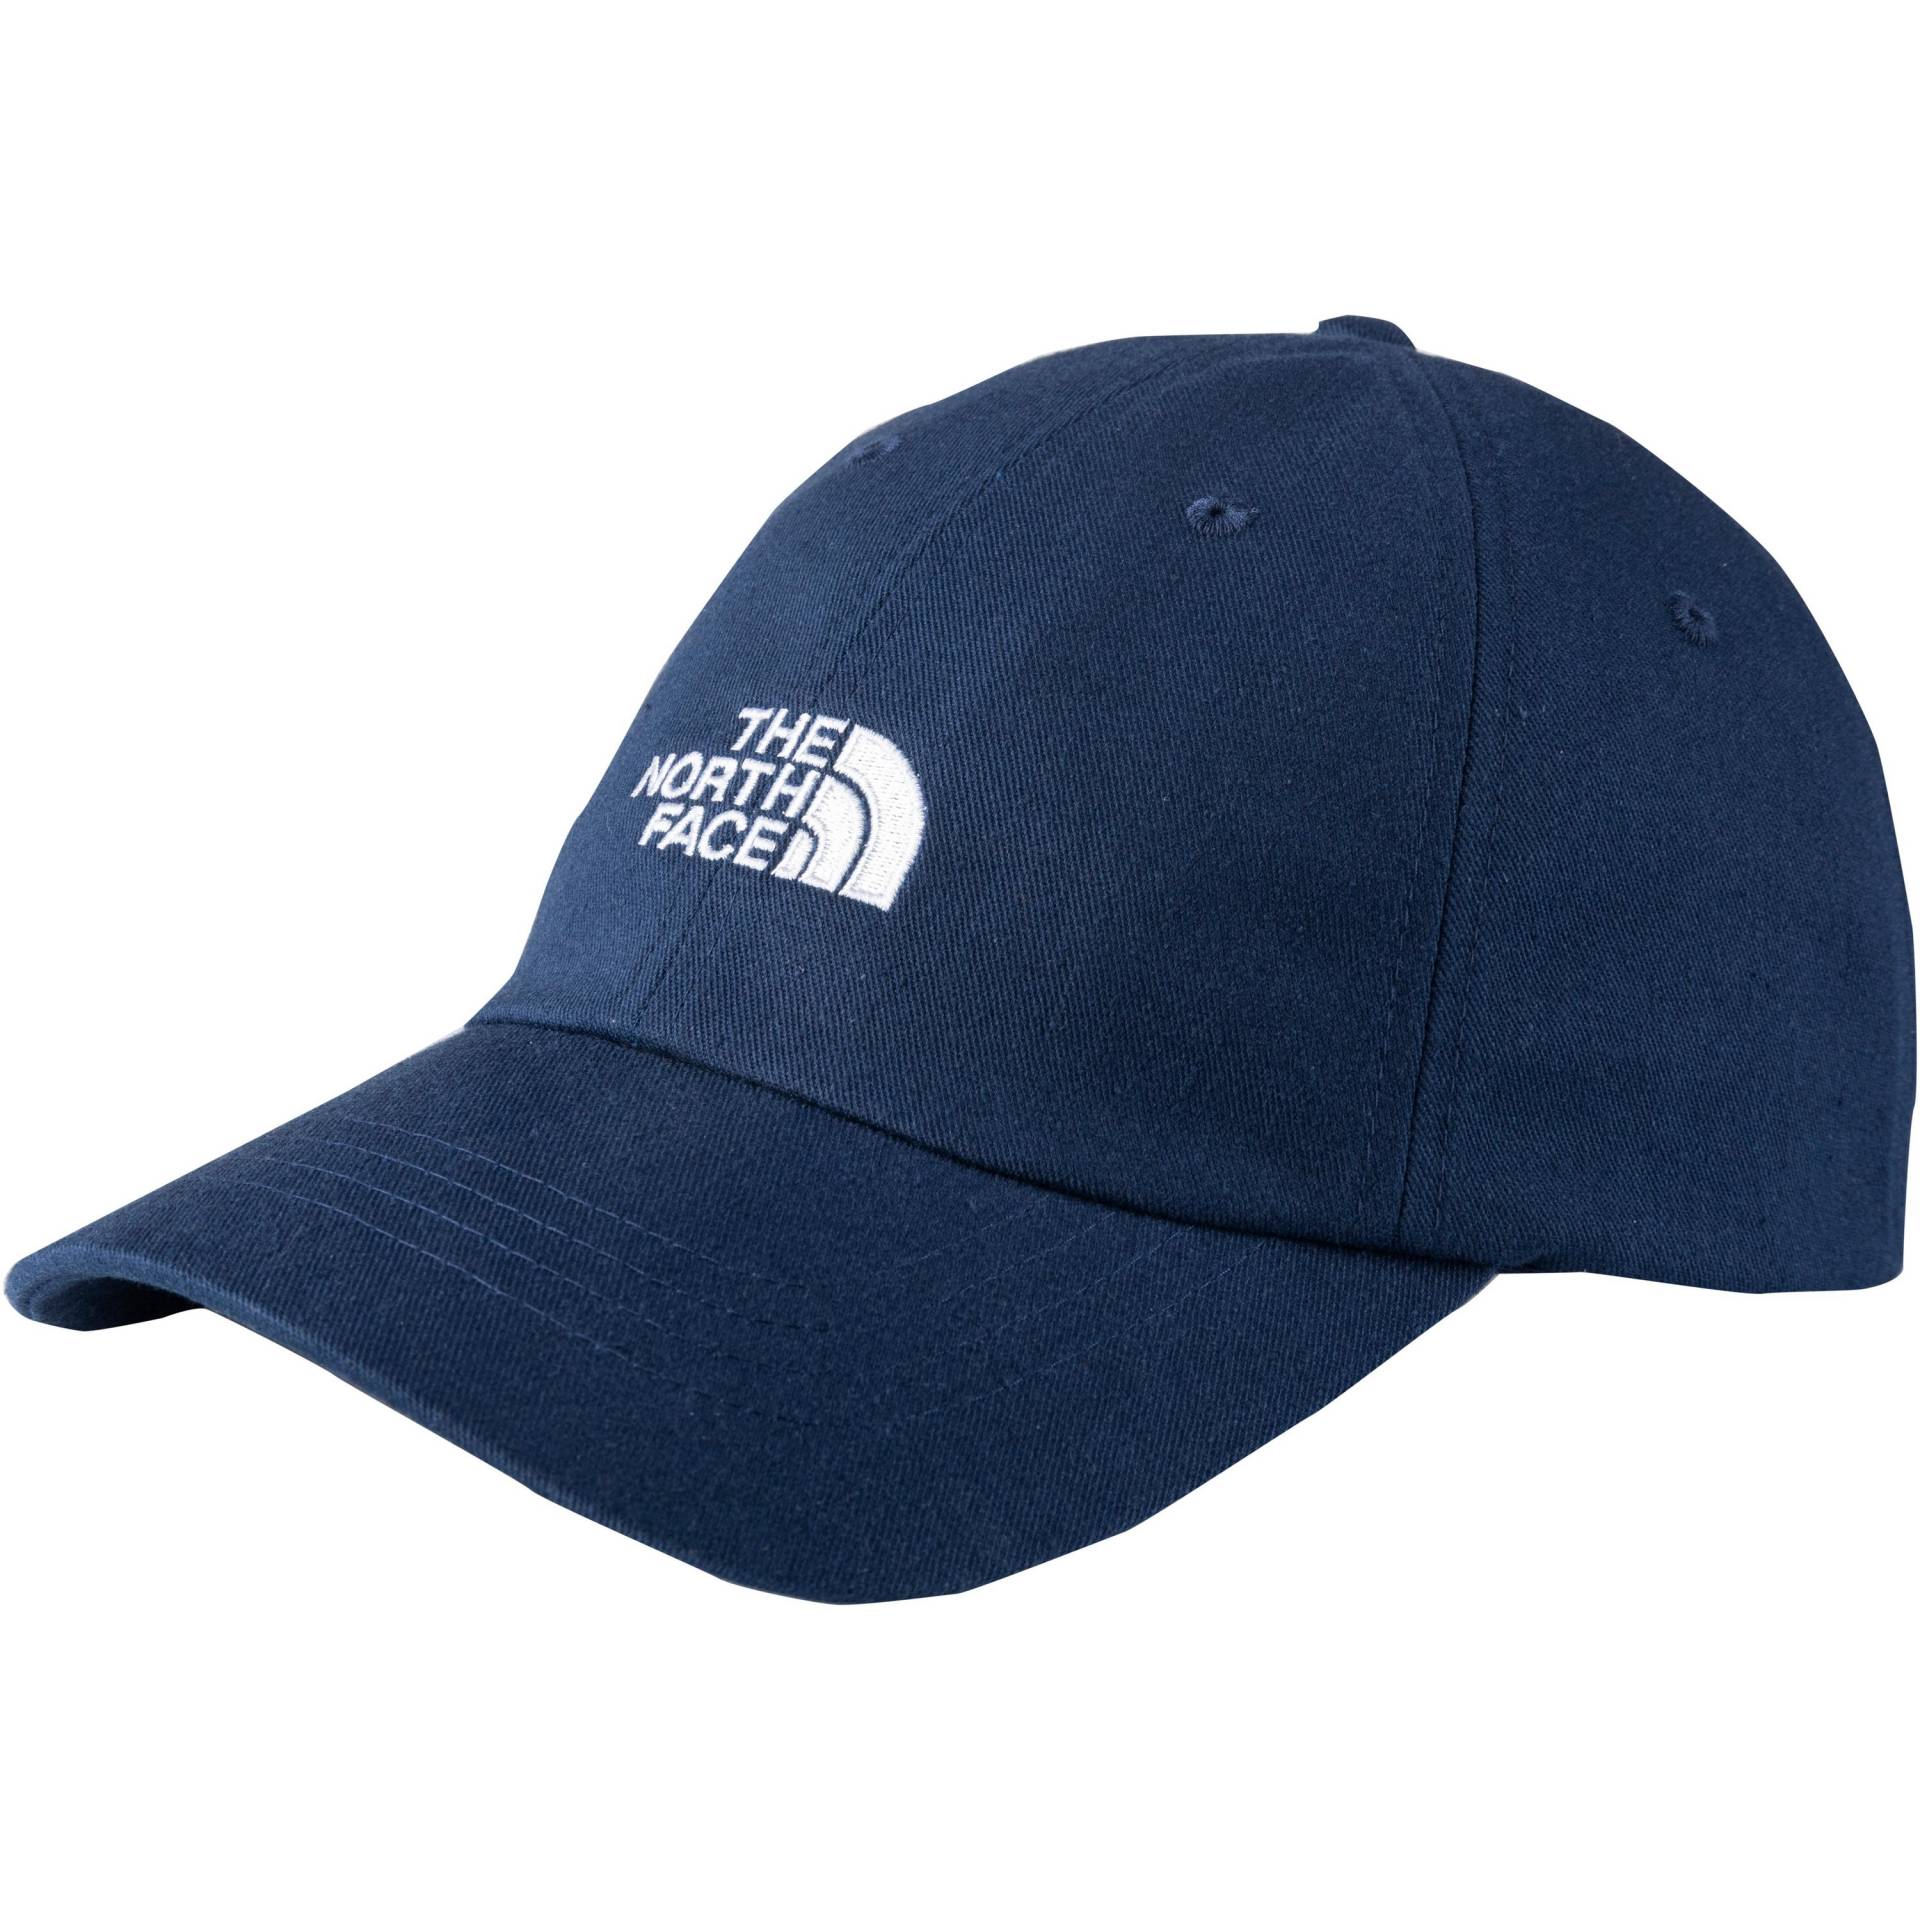 The North Face NORM Cap von The North Face